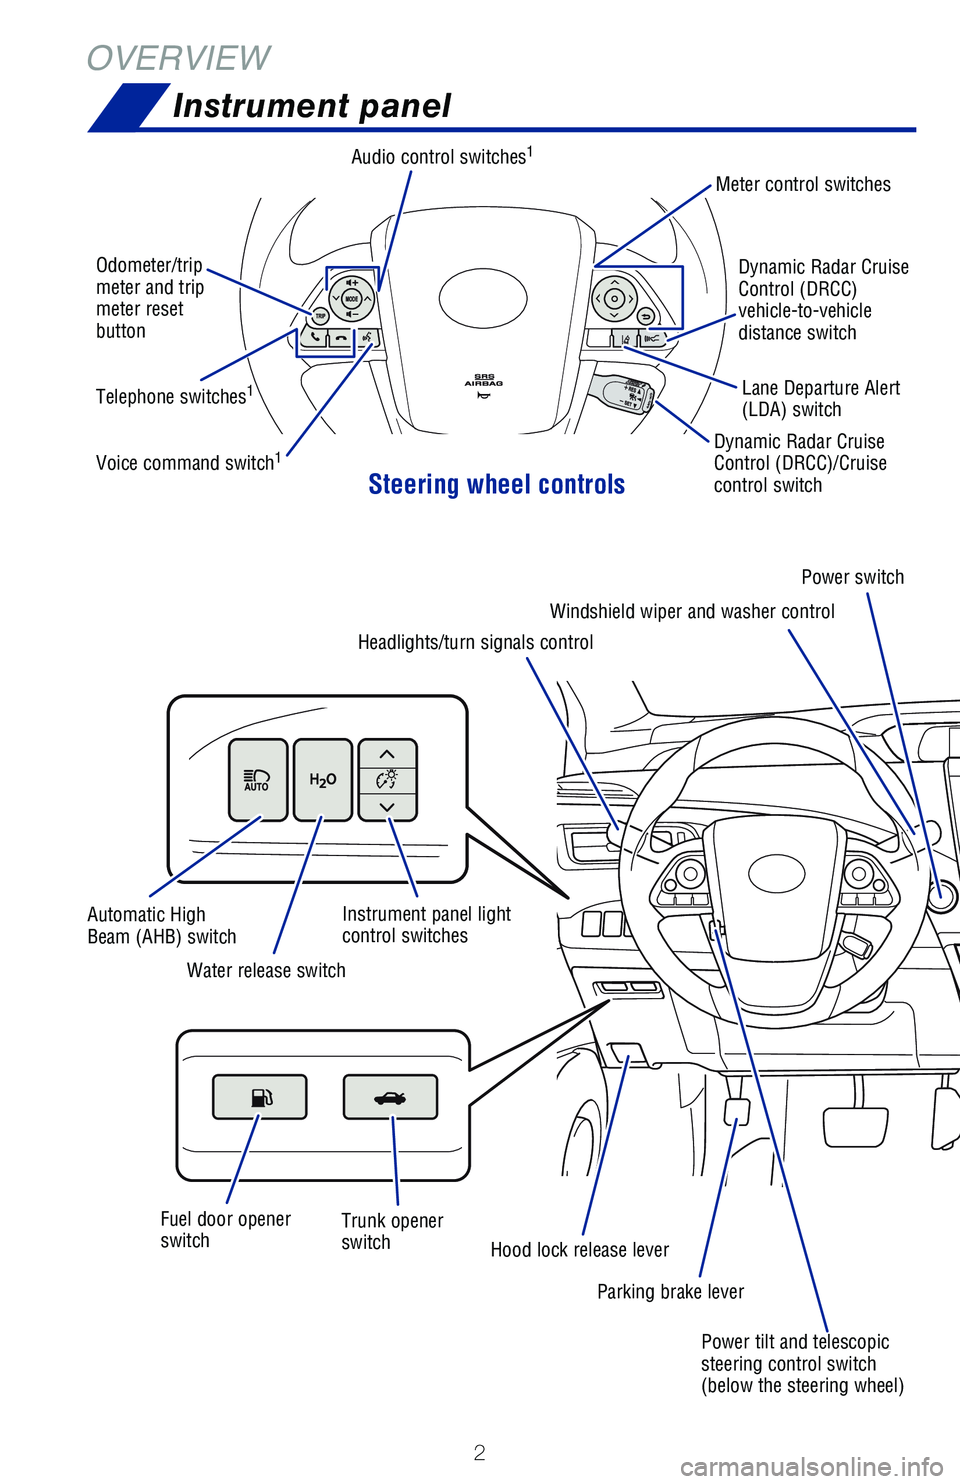 TOYOTA MIRAI 2020  Owners Manual (in English) 2
OVERVIEWInstrument panel
Steering wheel controls
Odometer/trip
meter and trip 
meter reset 
button
Telephone switches
1
Voice command switch1
Audio control switches1
Dynamic Radar Cruise 
Control (D